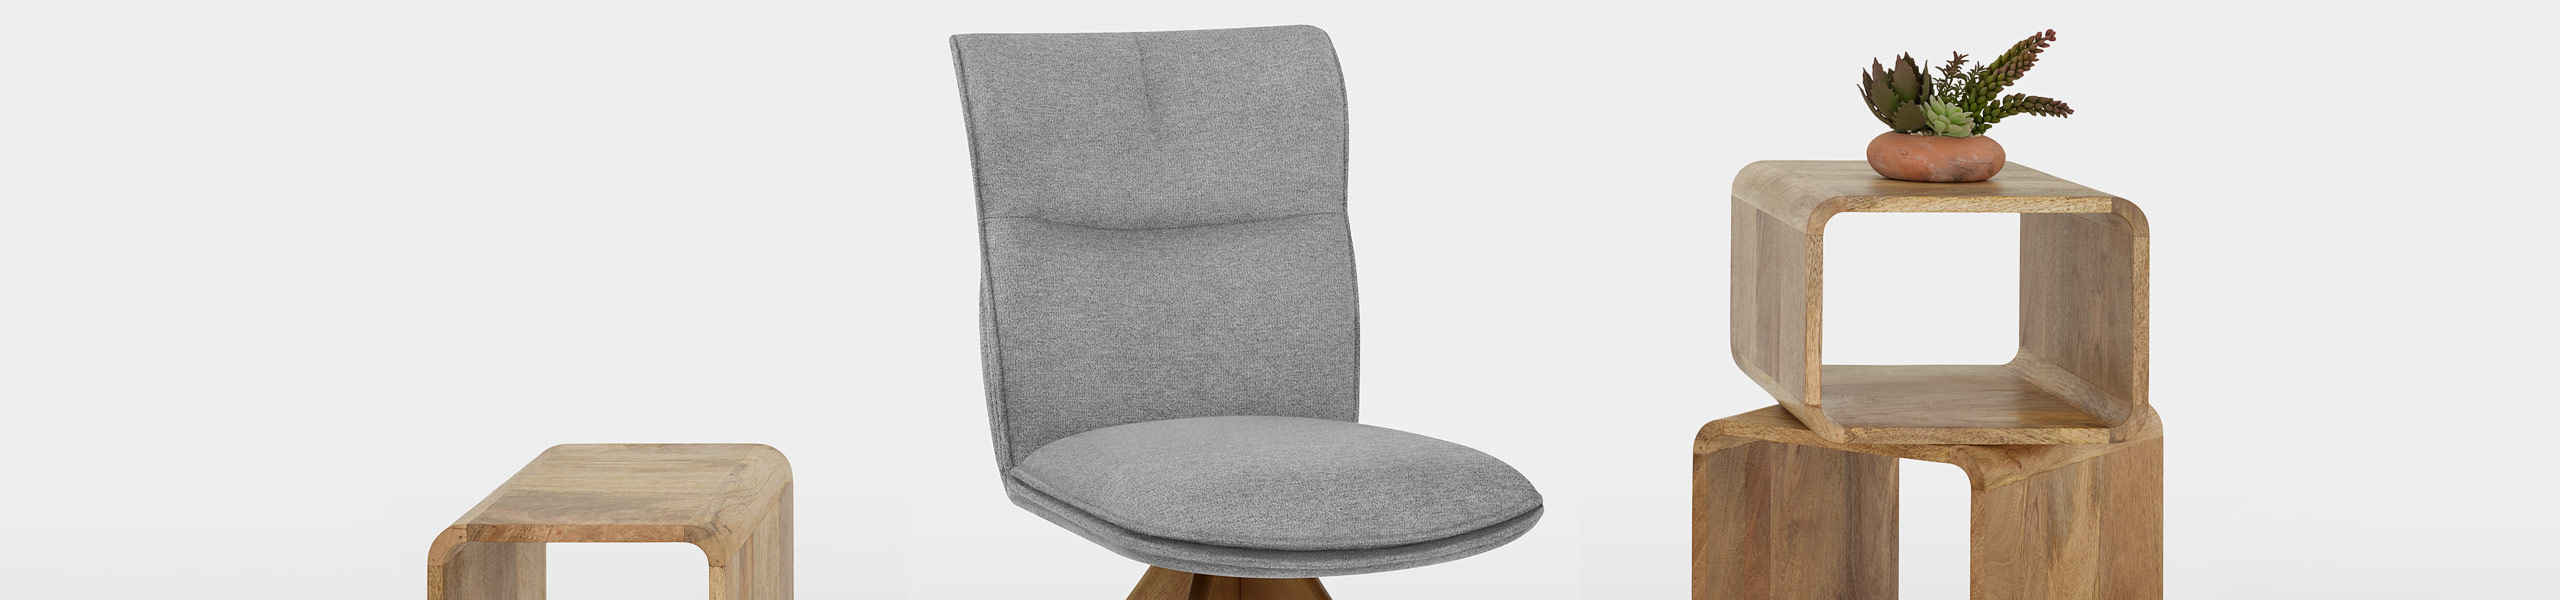 Cody Wooden Dining Chair Light Grey Fabric Video Banner